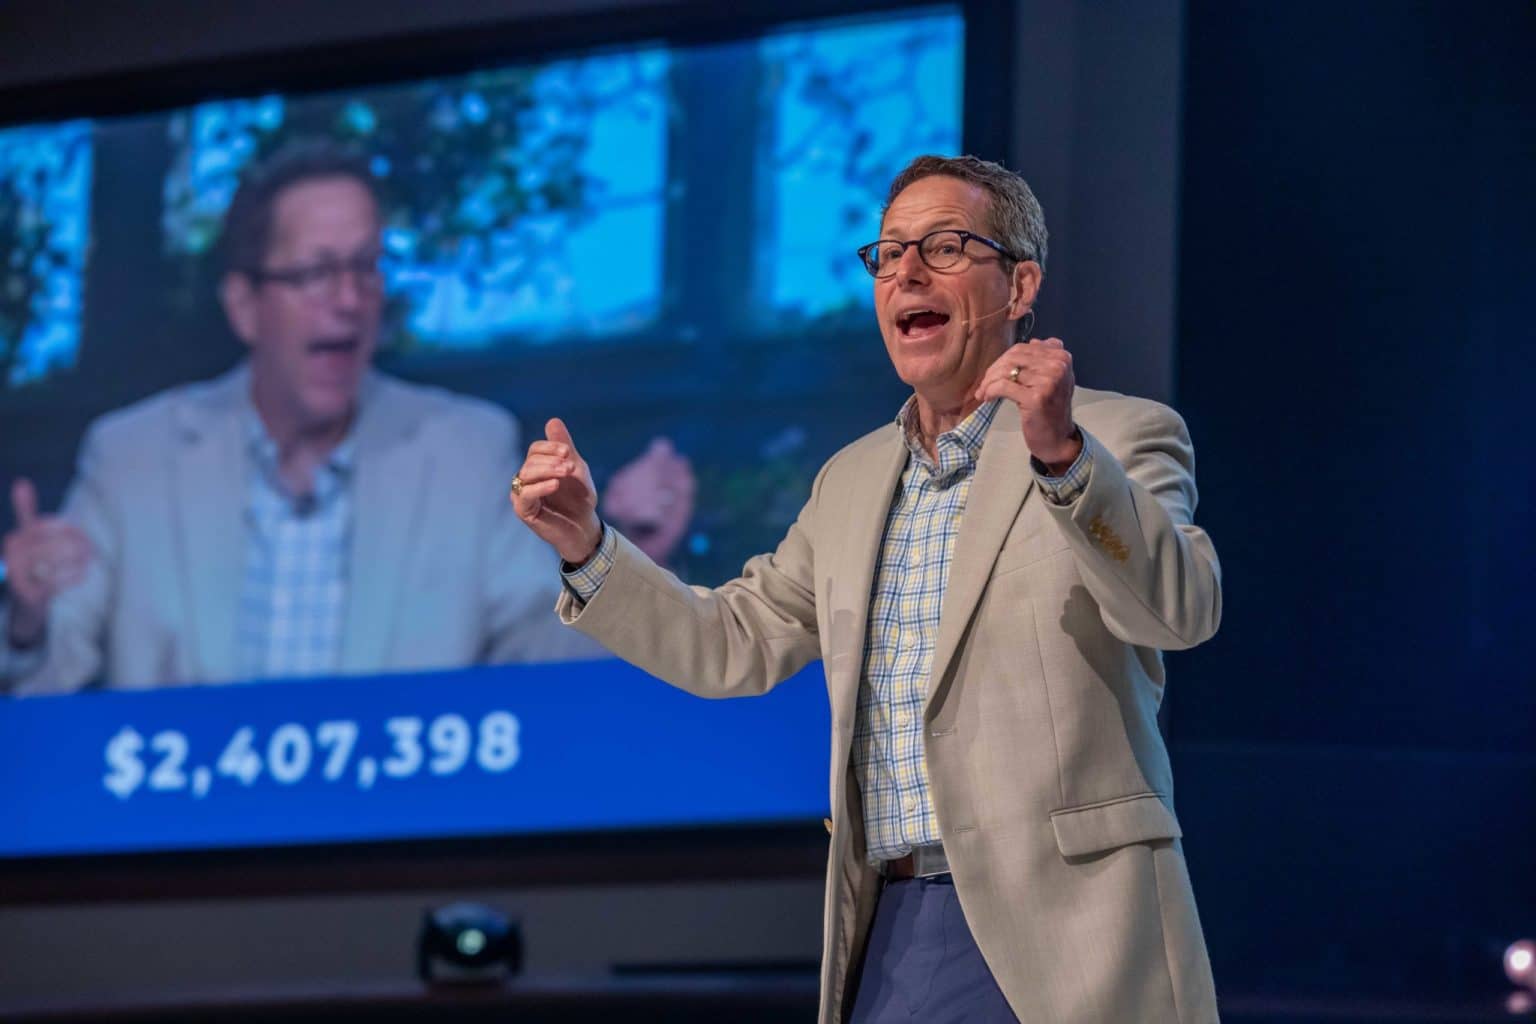 Gregg Matte, senior pastor of Houston’s First Baptist Church, celebrates the record World Mission Offering on Easter Sunday, April 4. The total in the background grew by $220,000 over the following days. (Photo by Richard Carson, courtesy of HFBC)